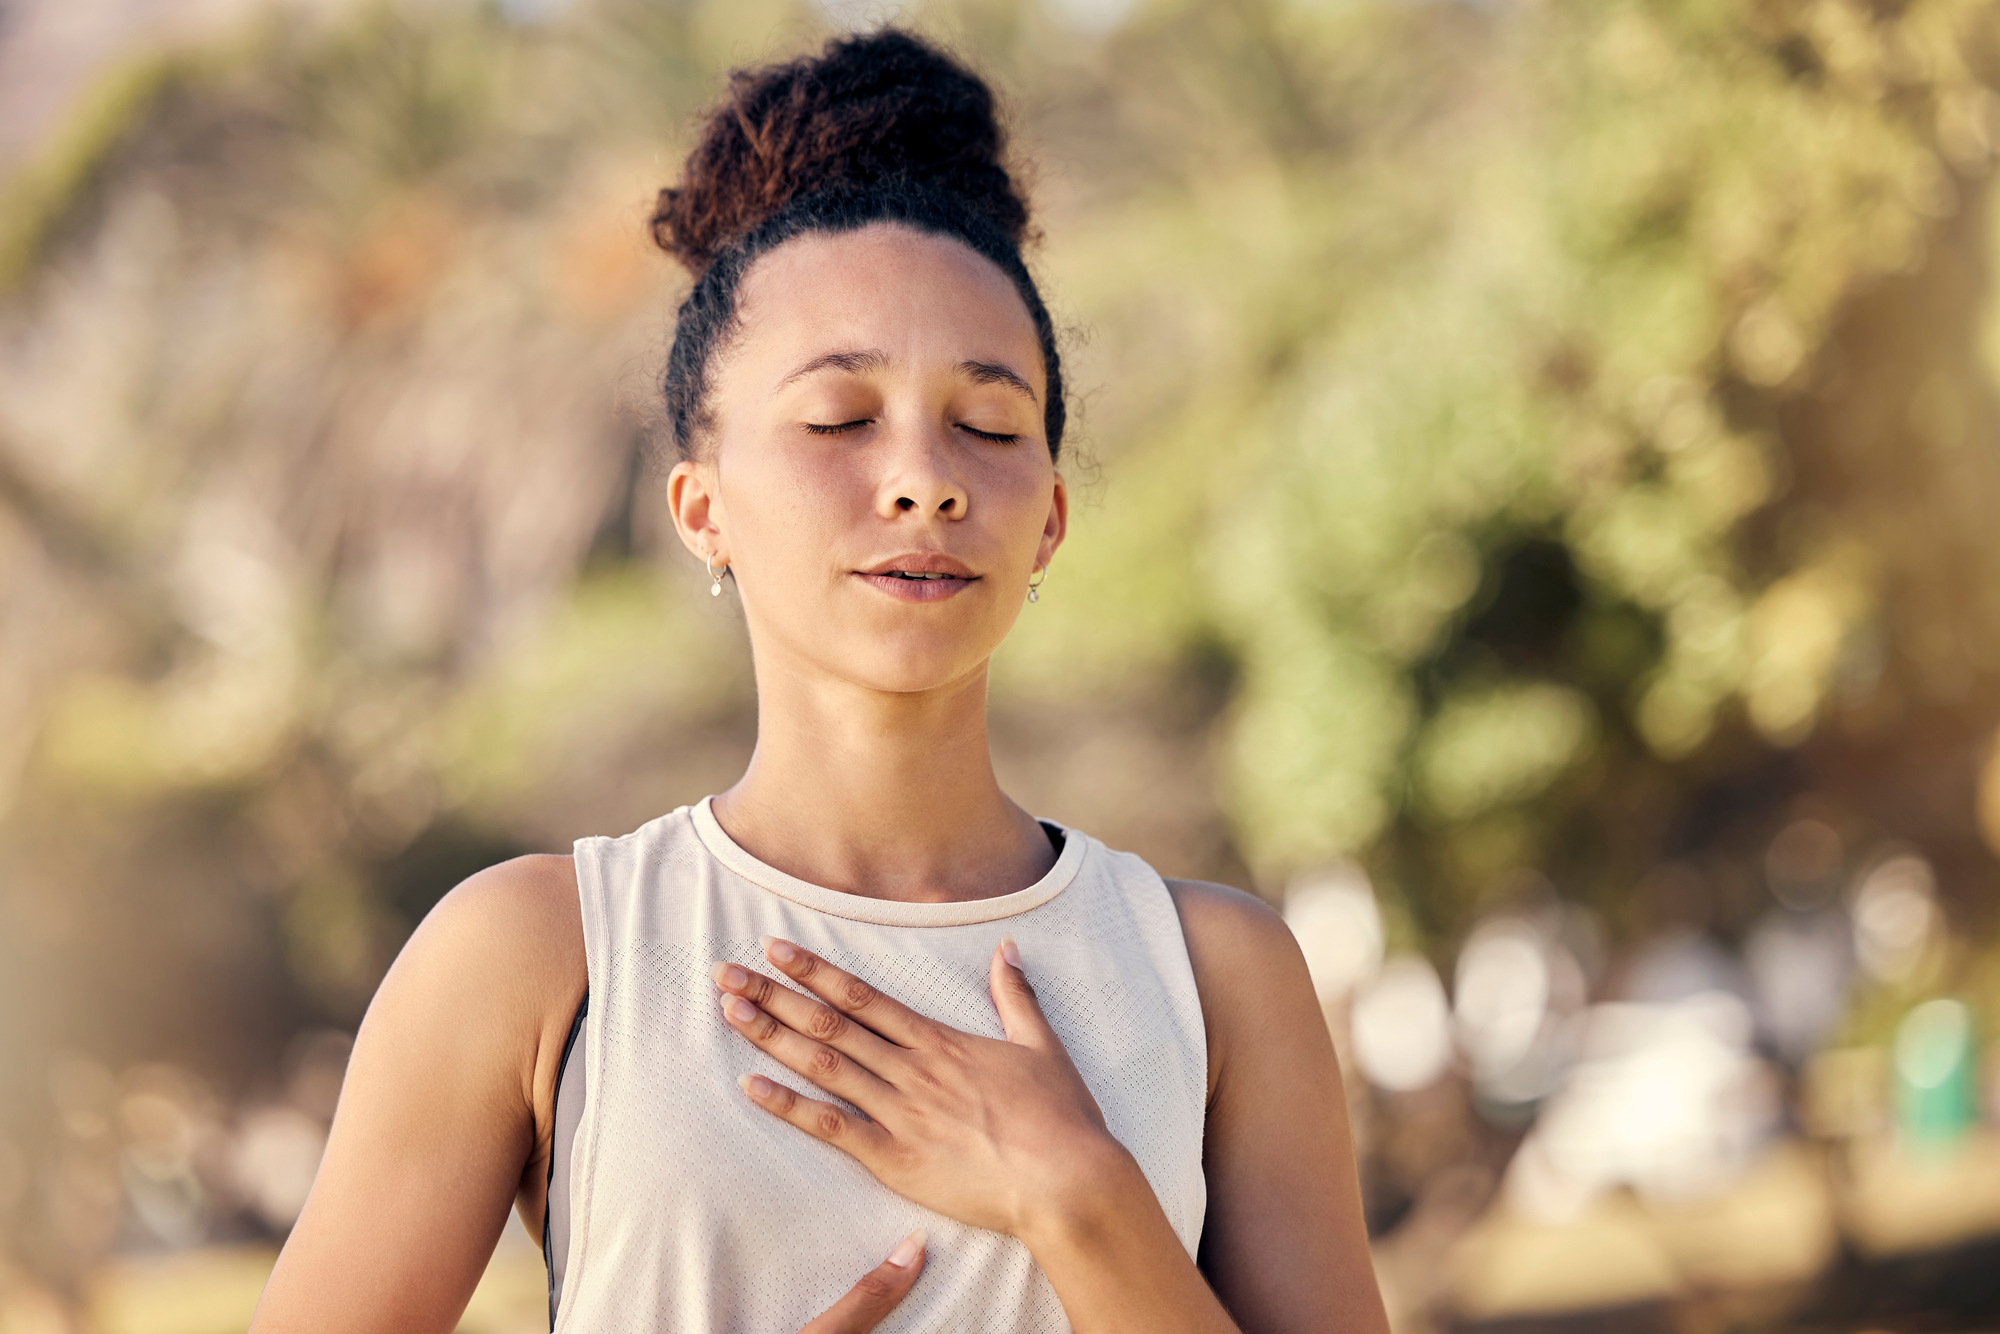 A person doing a breathing exercise